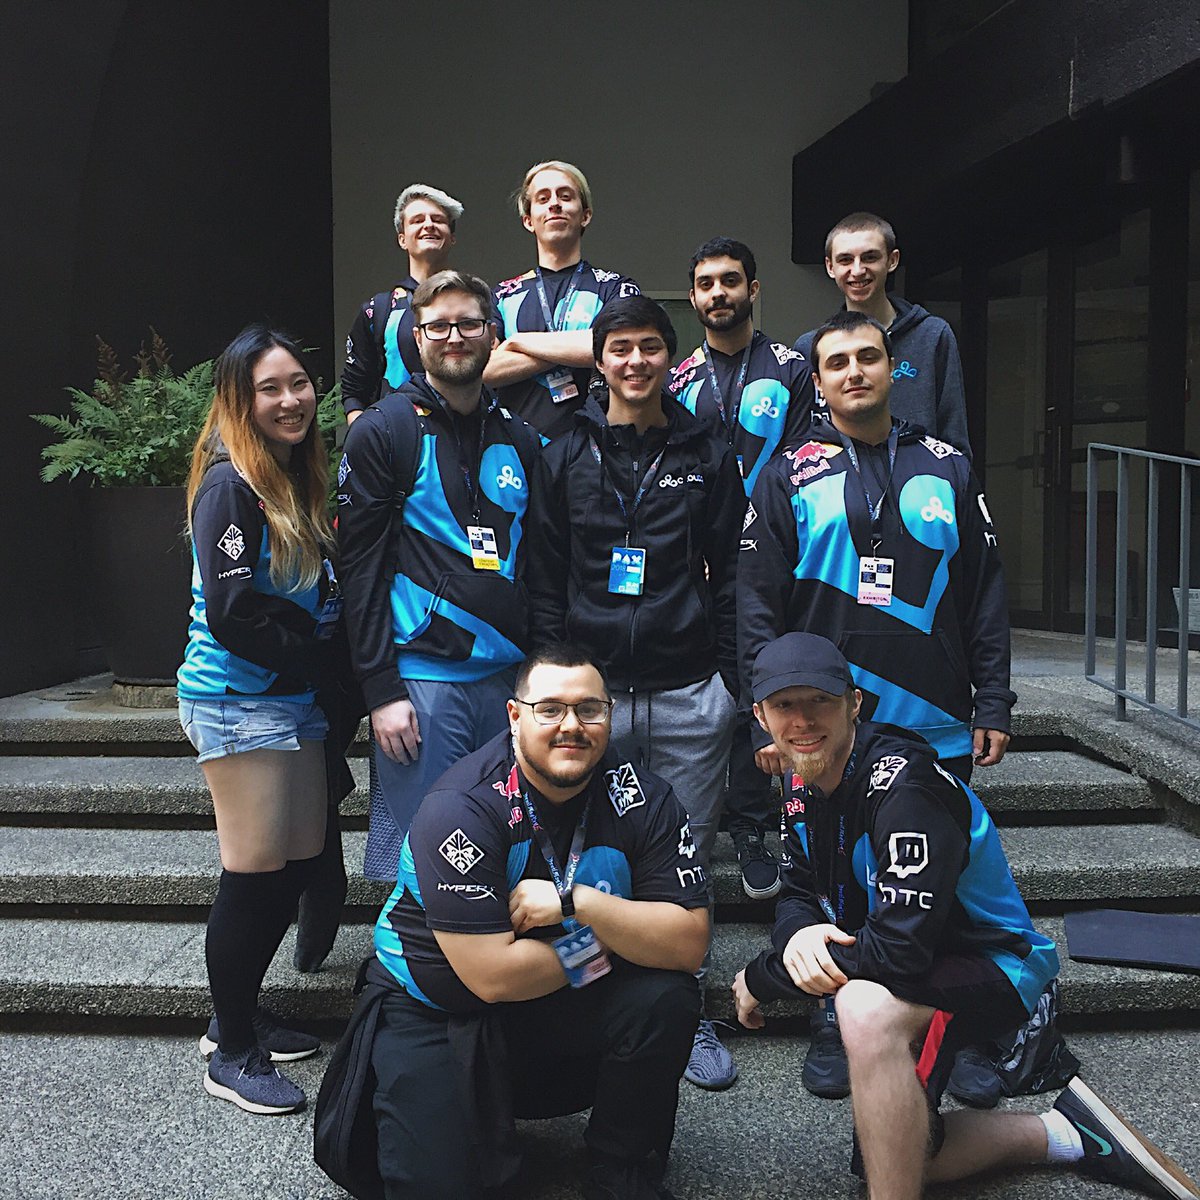 as exhausting as this weekend was, i had a ton of fun! it was wonderful meeting everyone and spending PAX West with the #c9fam 💙